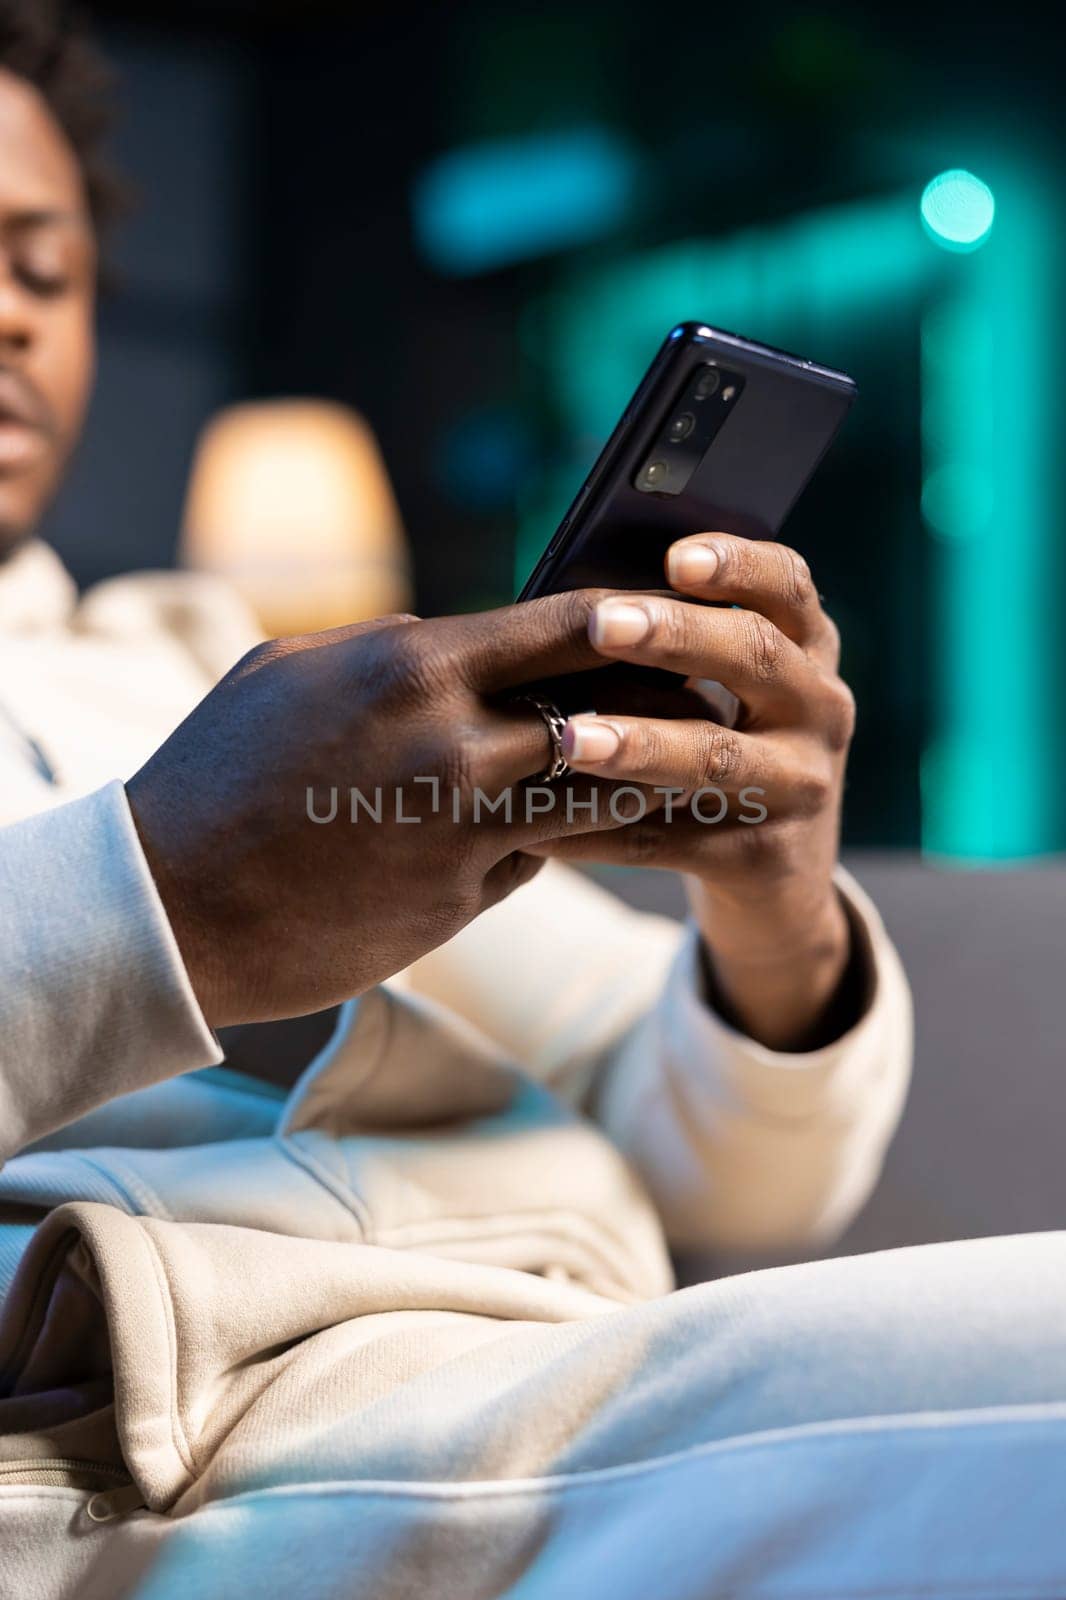 Focus on smartphone used by man in blurry background to compose messages by DCStudio